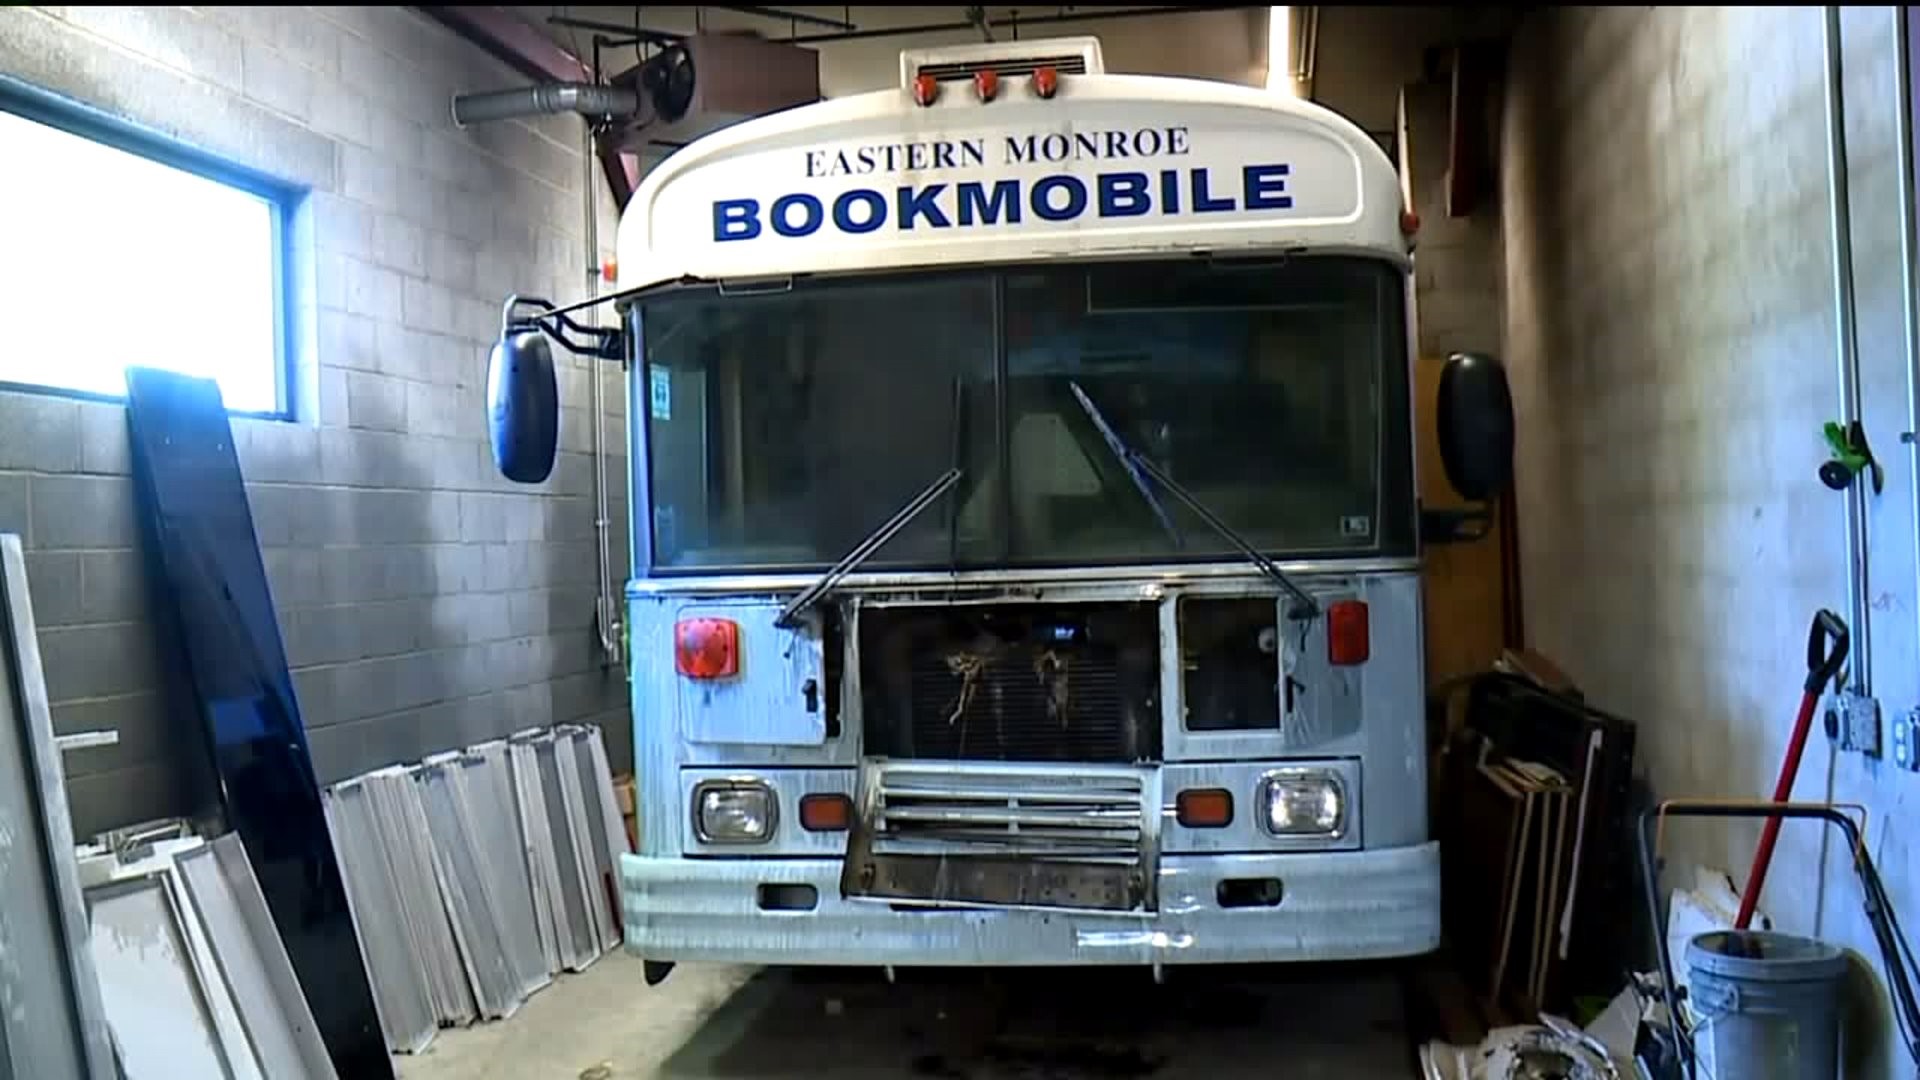 Fire Damages Bookmobile at Eastern Monroe Public Library